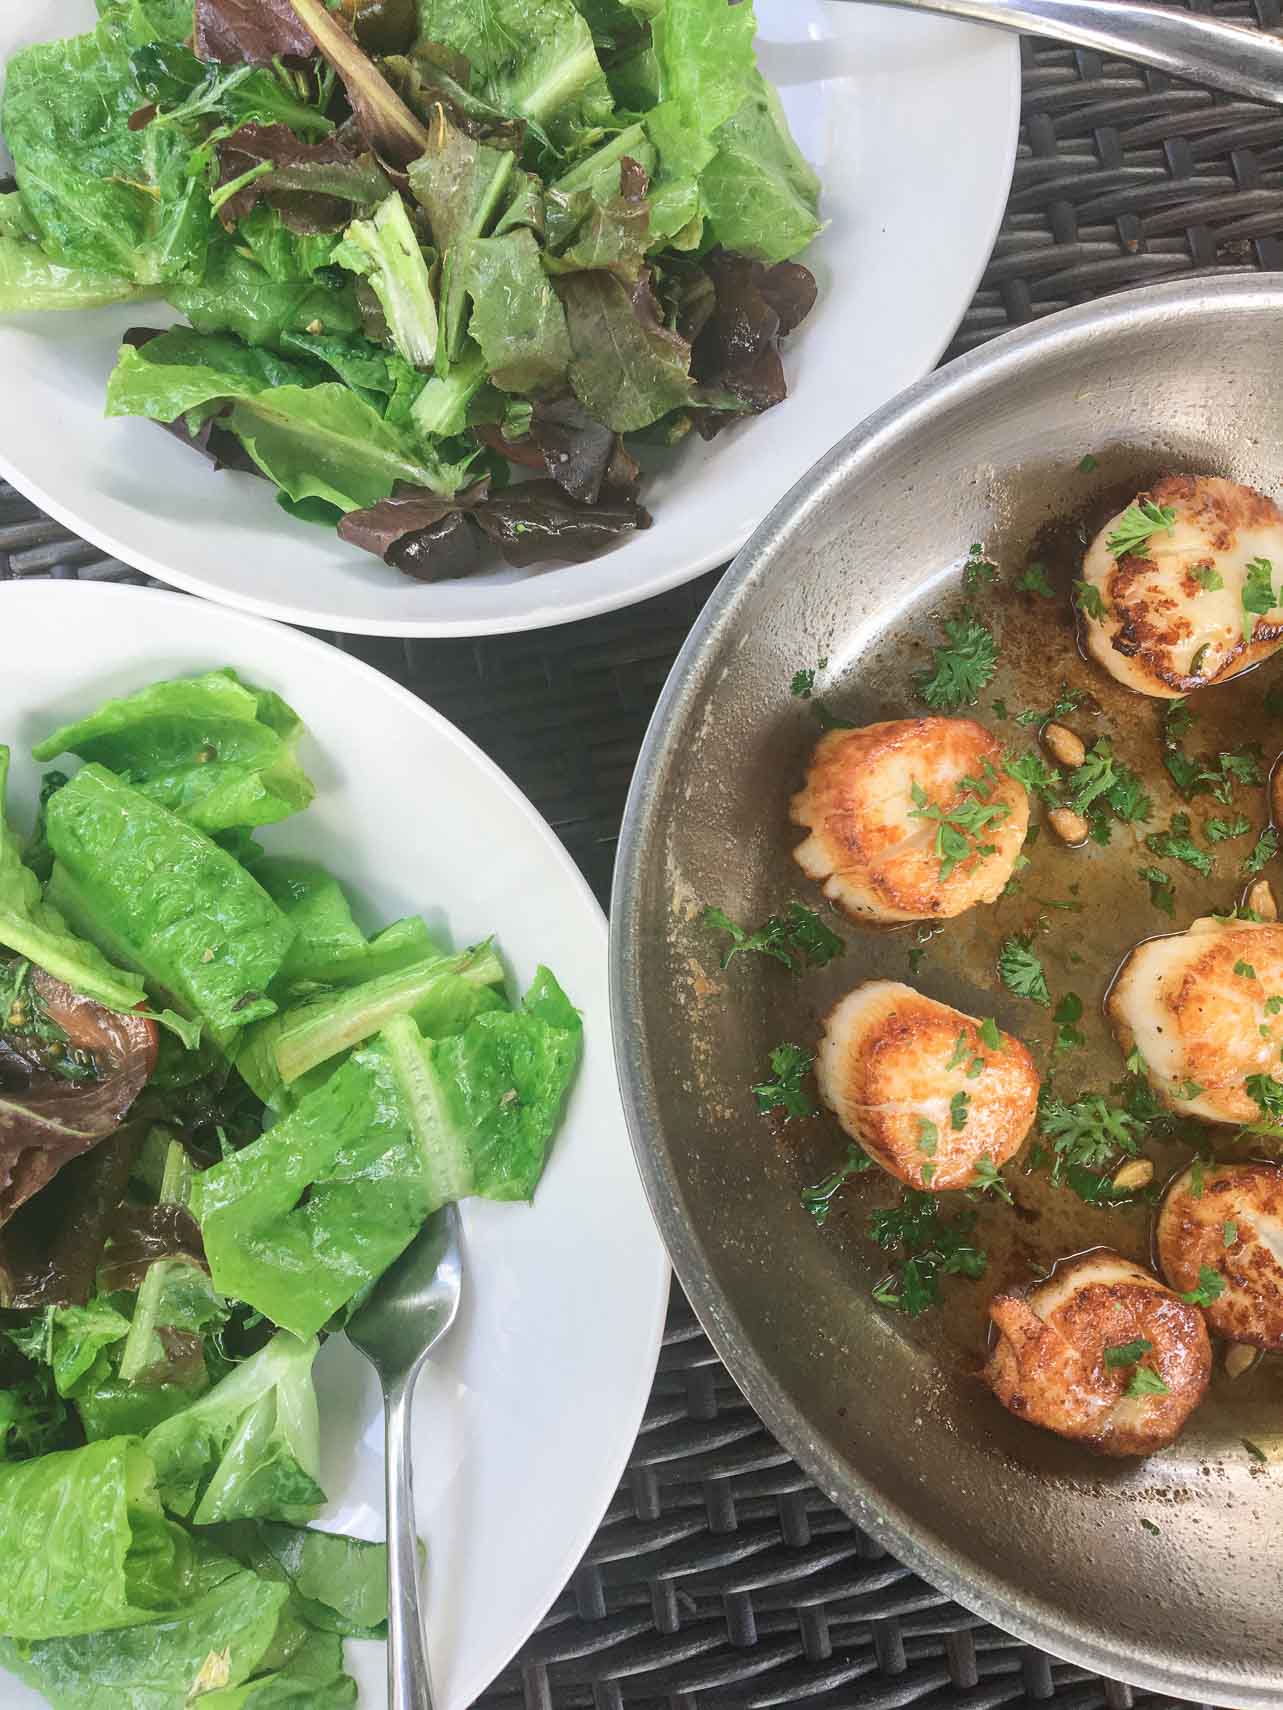 Carmelized juicy pan friend scallops served with fresh lettuce. 